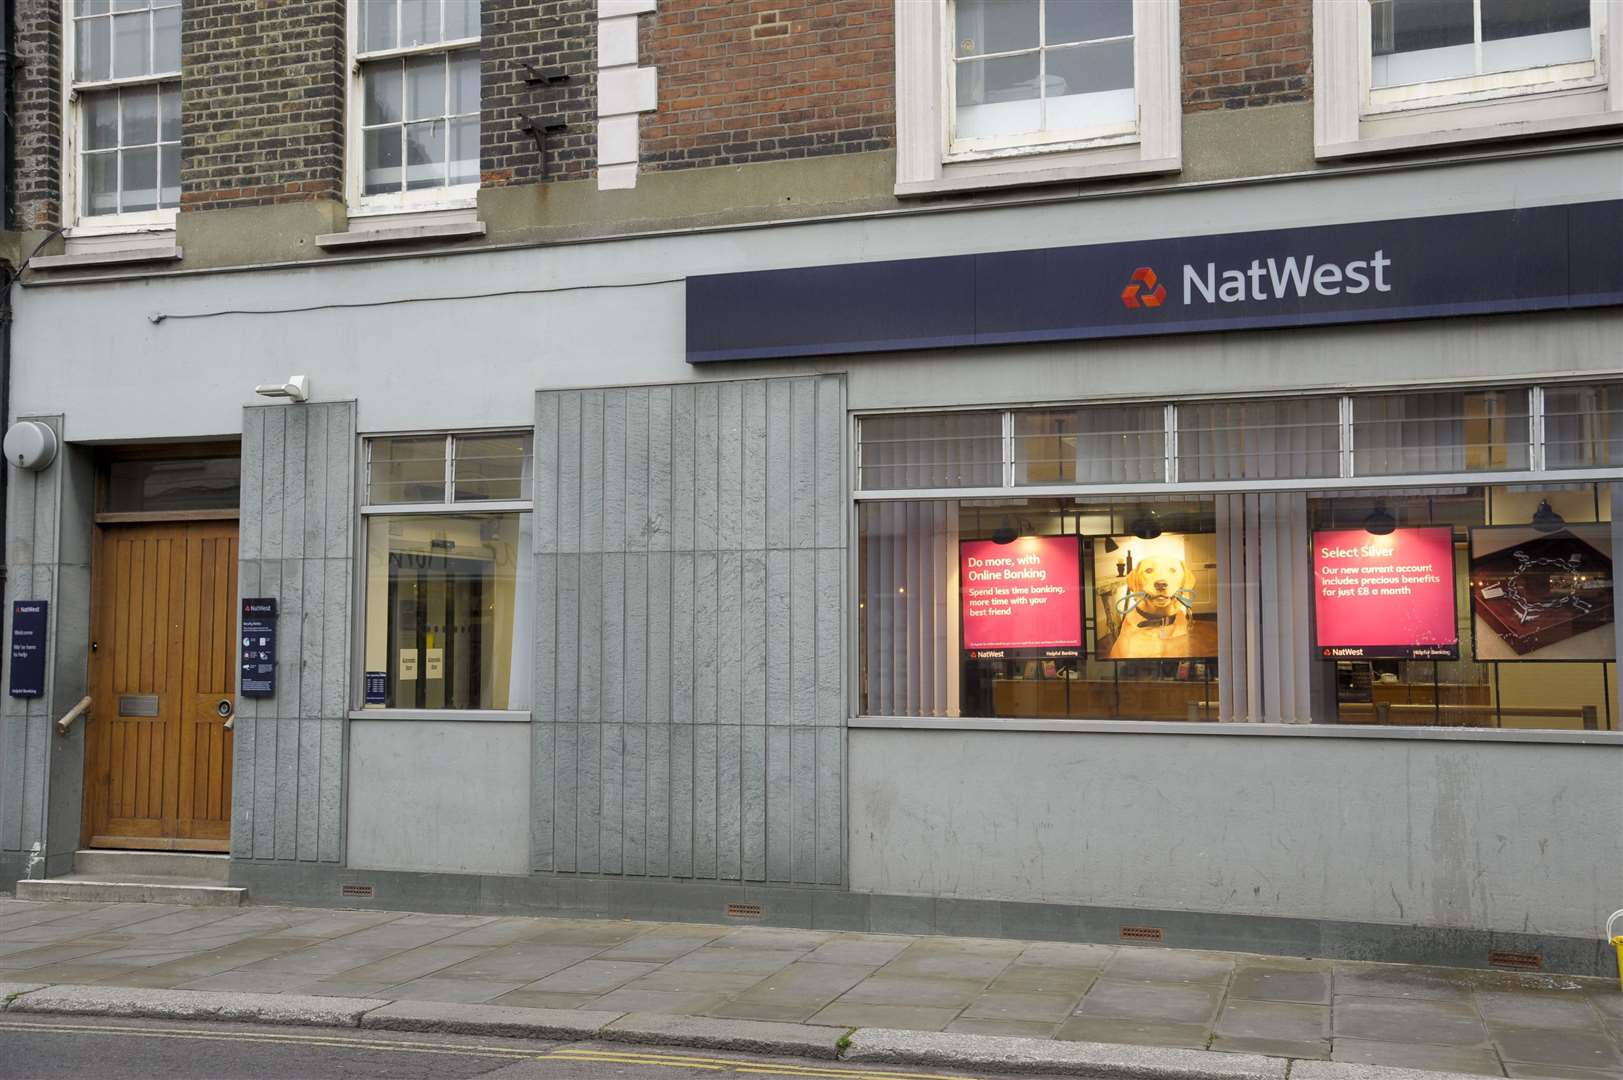 The days are numbered for the NatWest in Sheerness